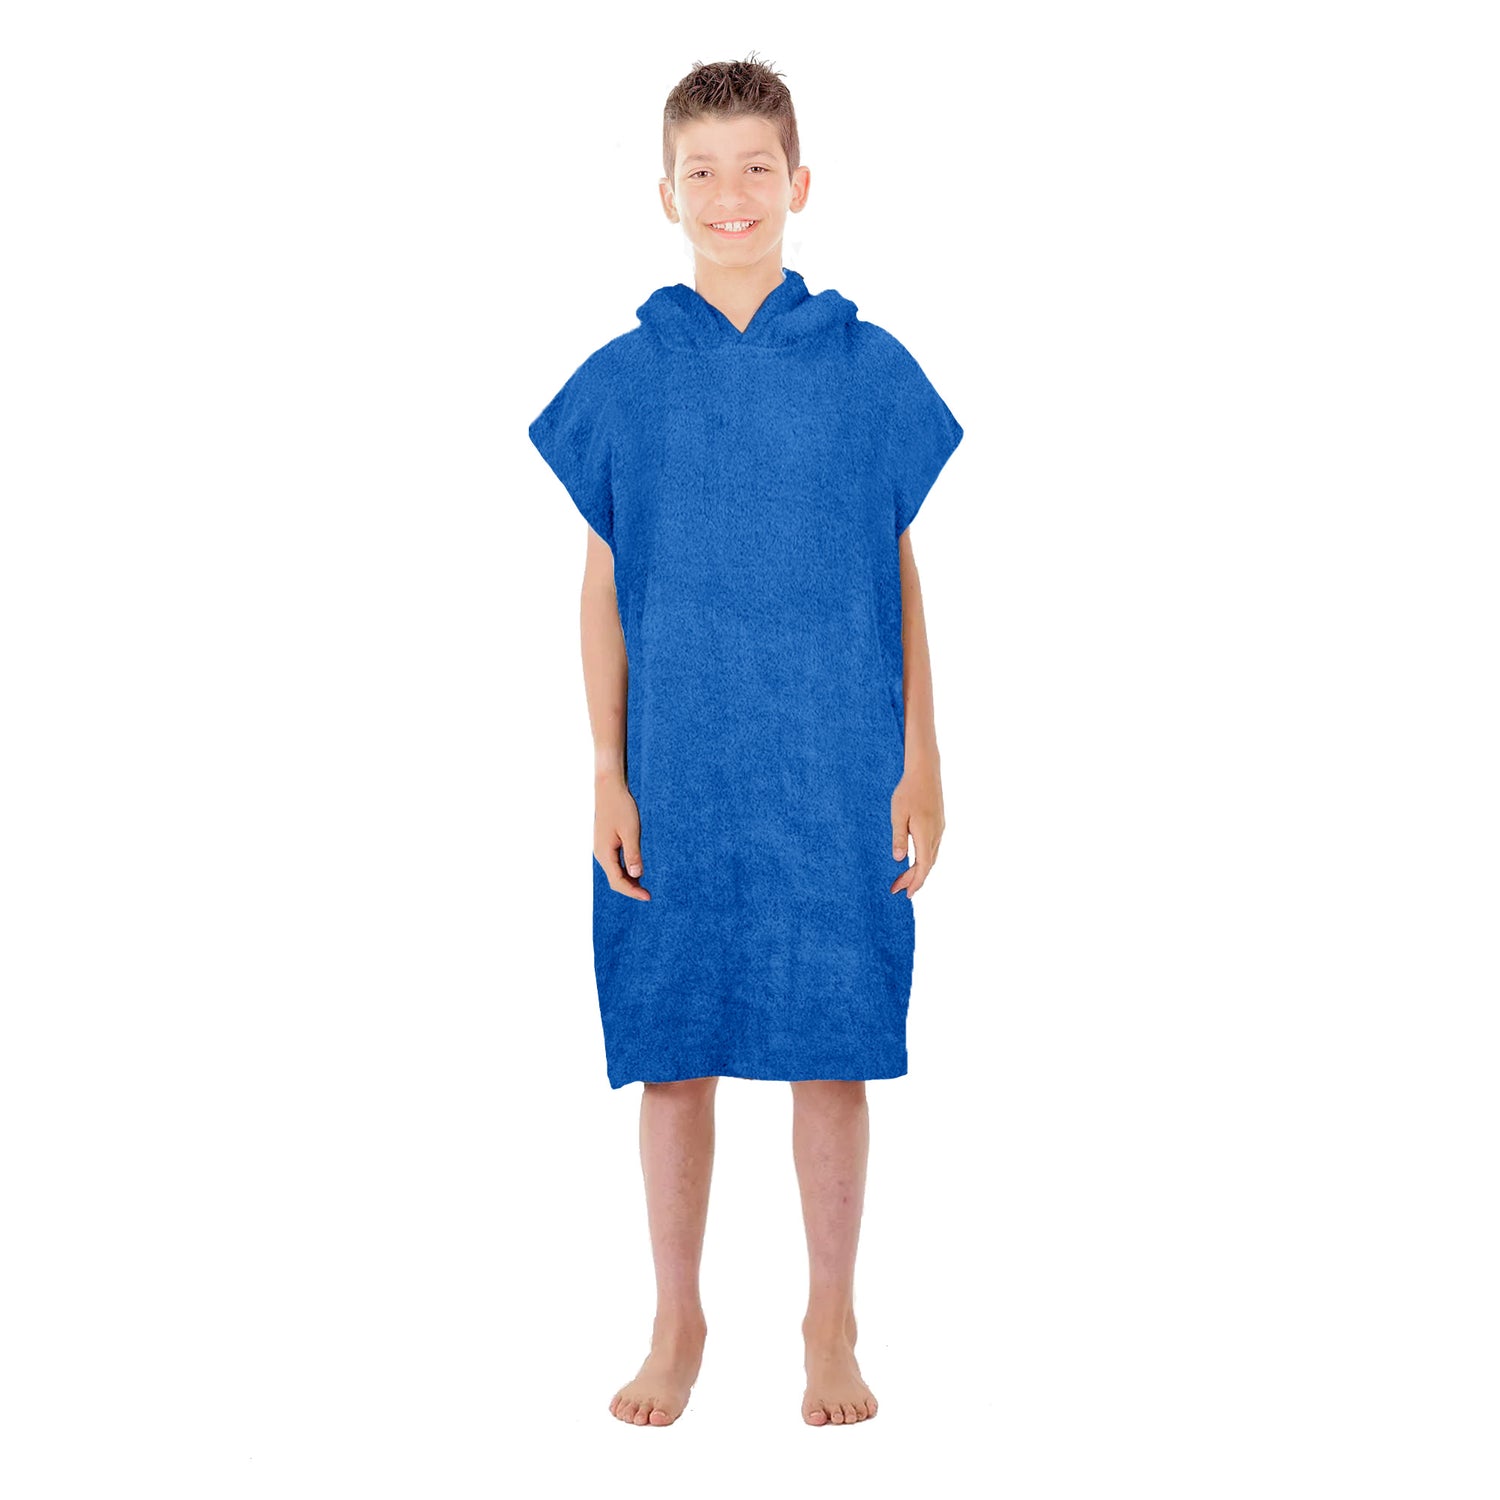 The Home Collection Towel Poncho - Medium/Large - Blue 1 Shaws Department Stores